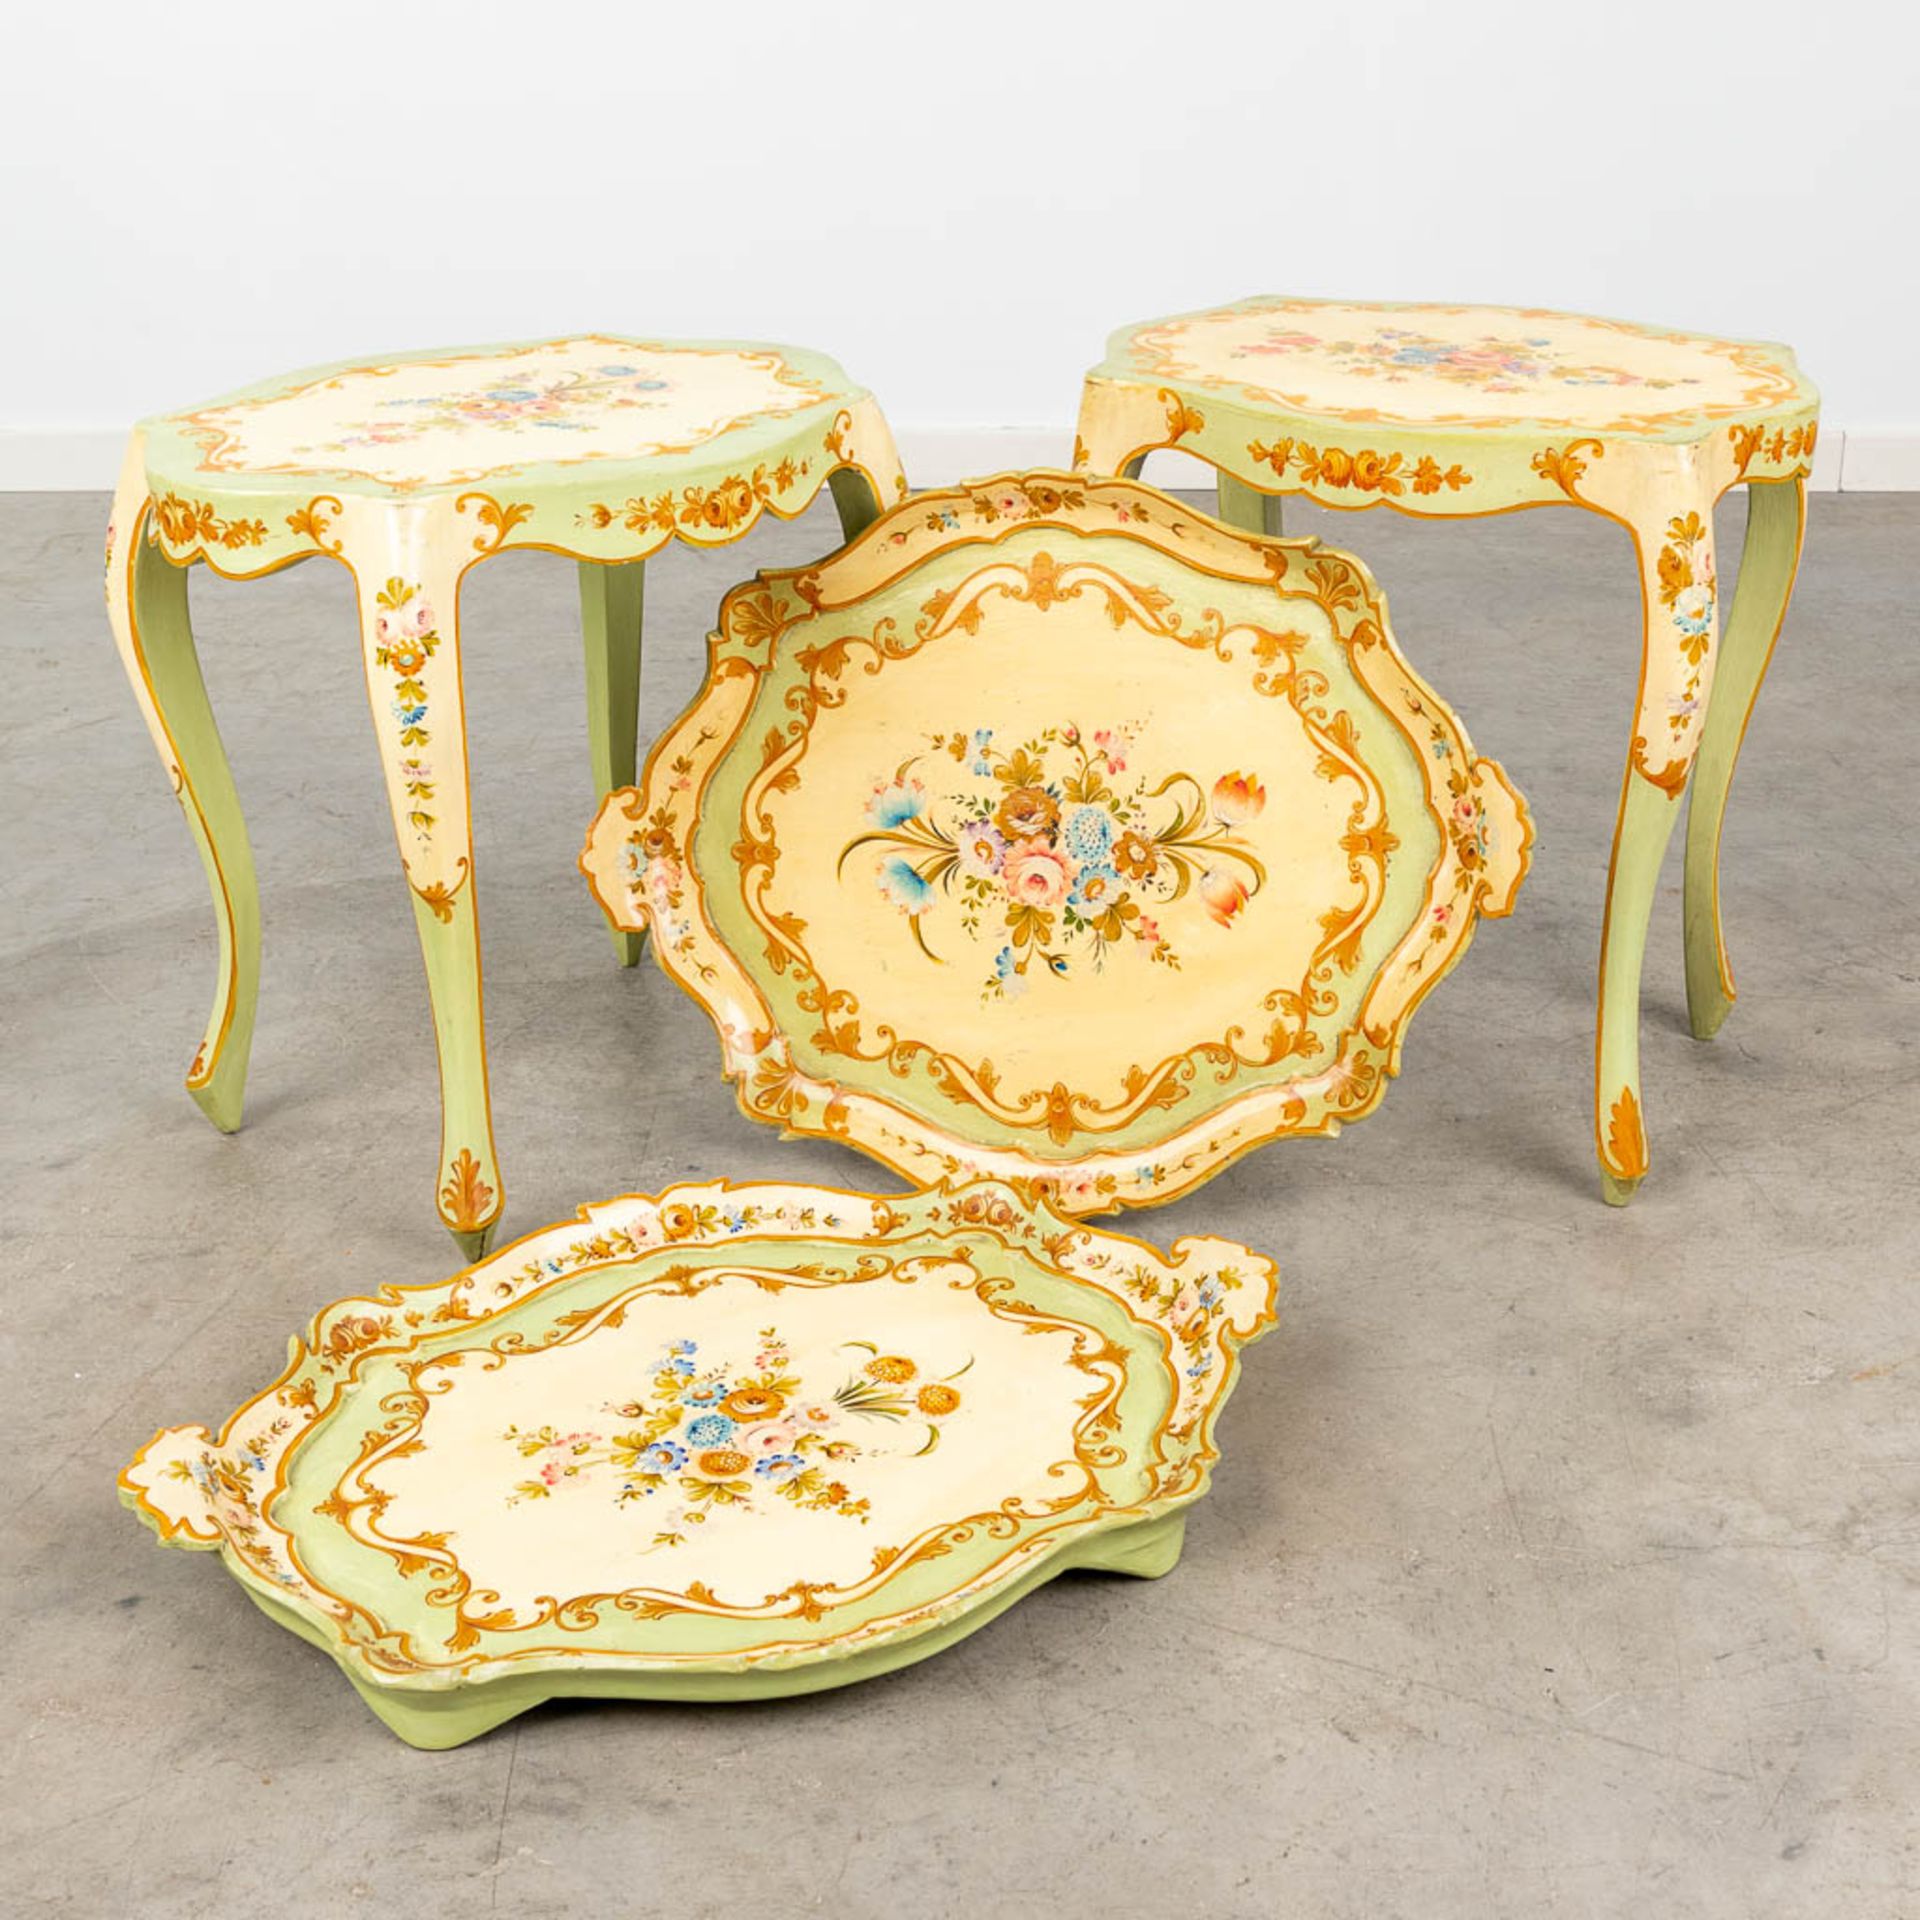 A pair of side tables with removable serving tray, decorated with hand-painted flowers. Italy, circa